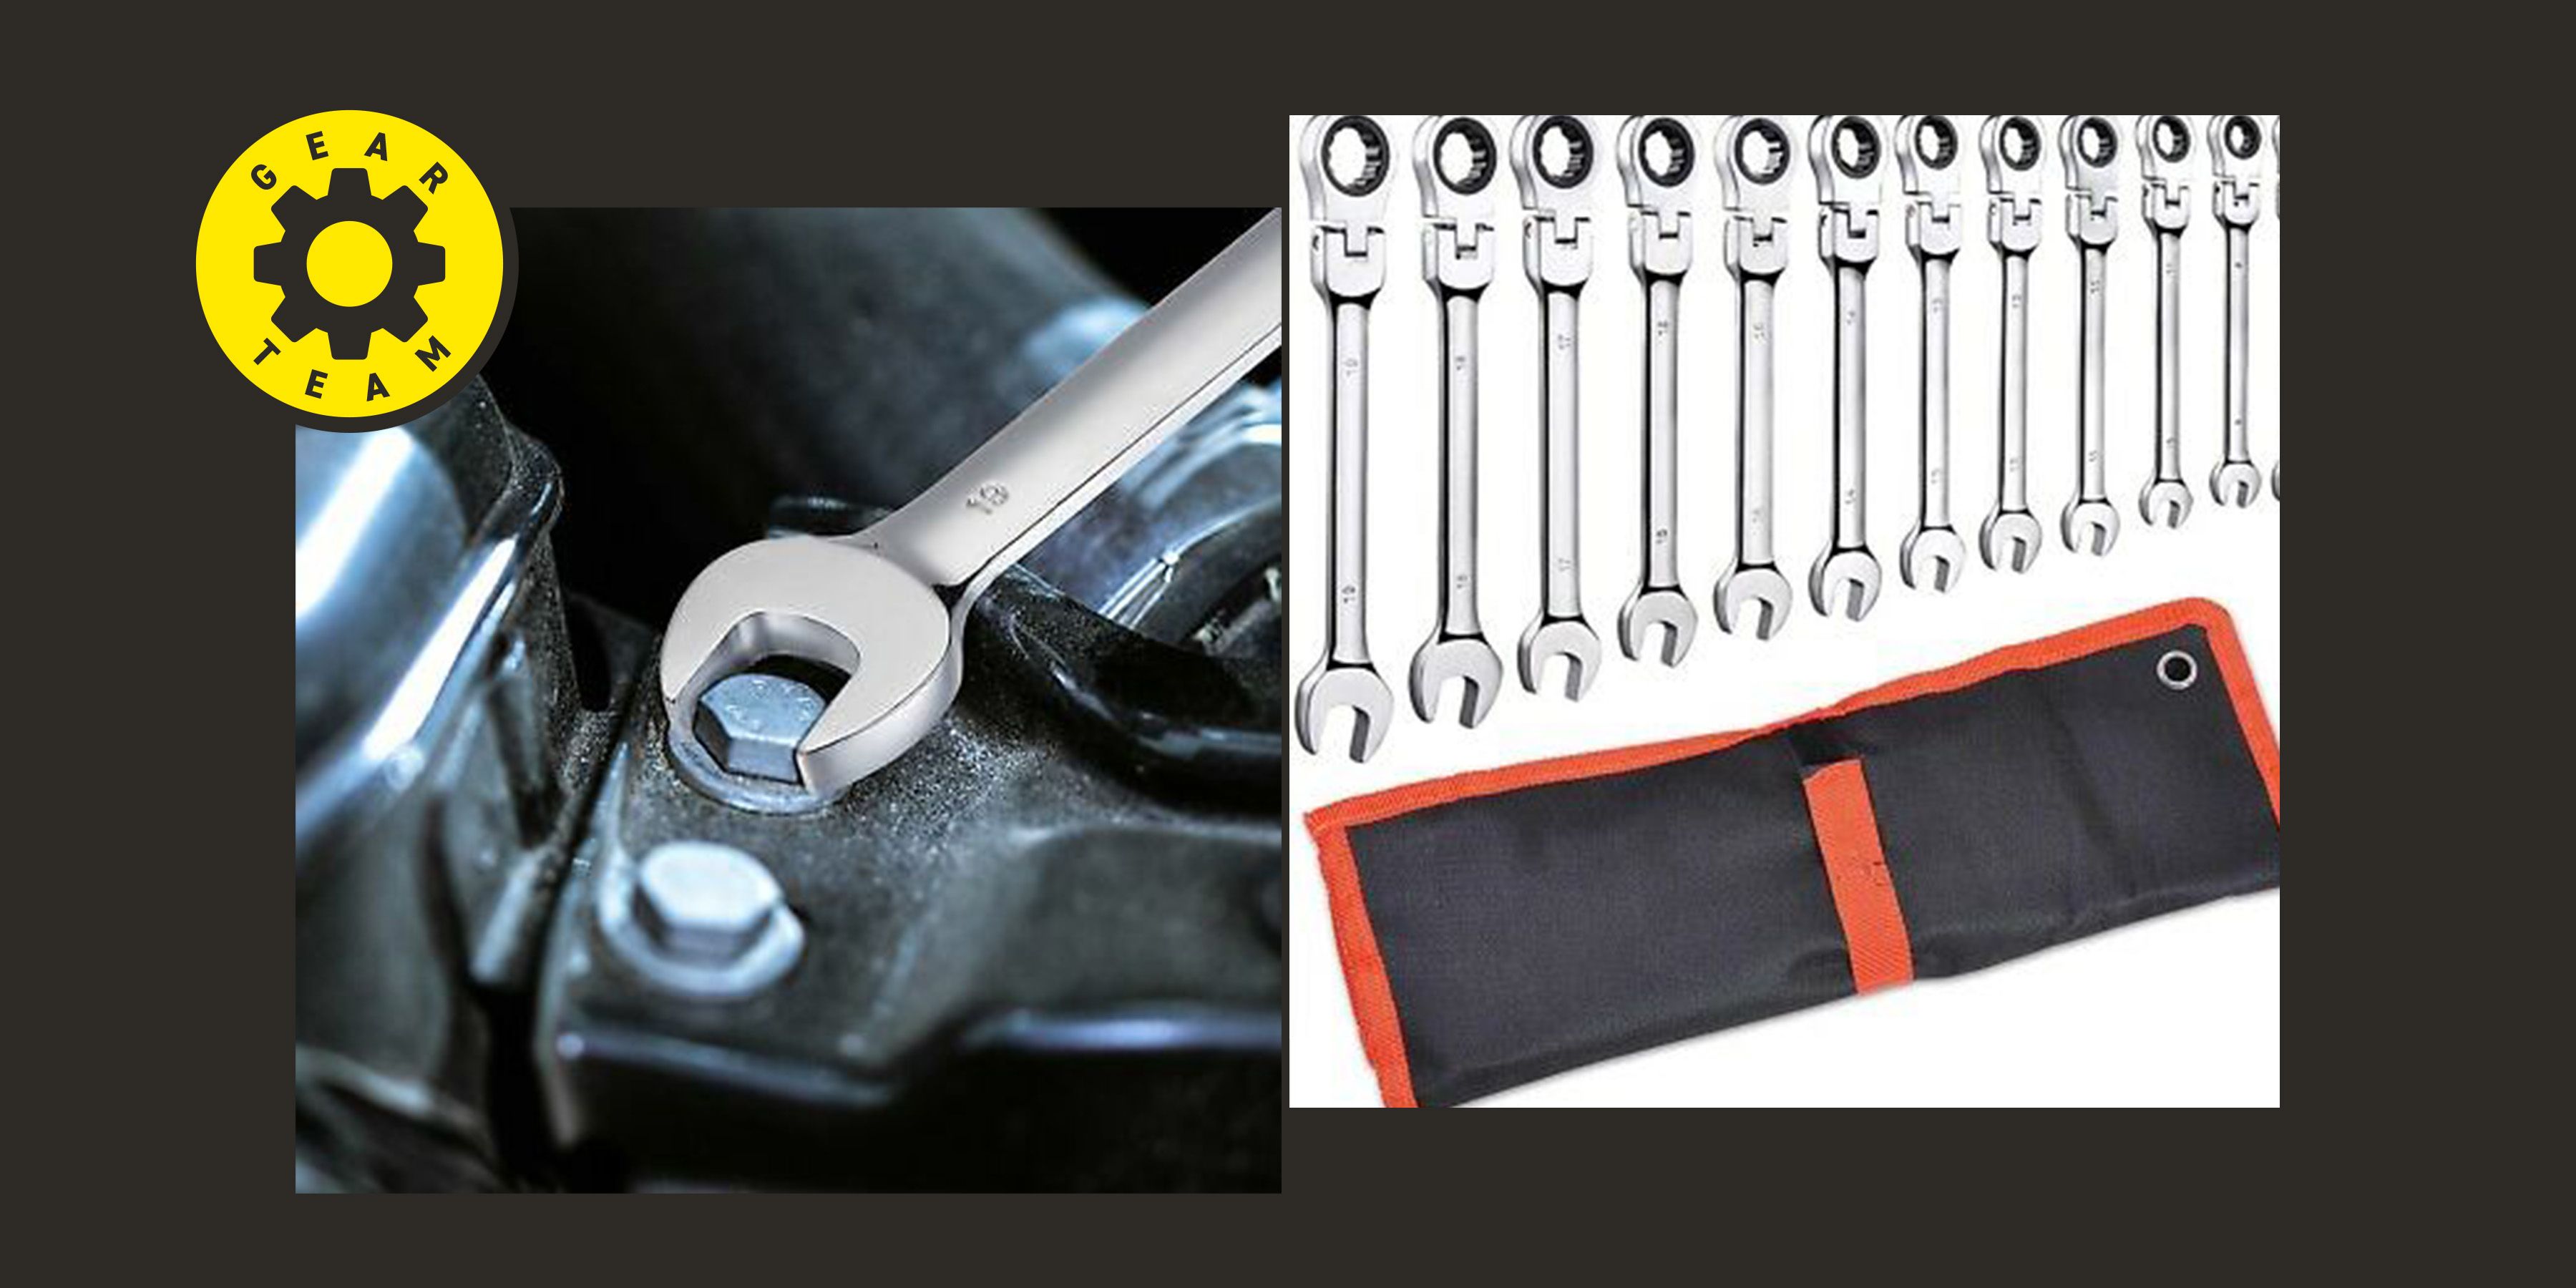 Deal Alert: This Go-To Toolbox Essential Is 58% Off Right Now